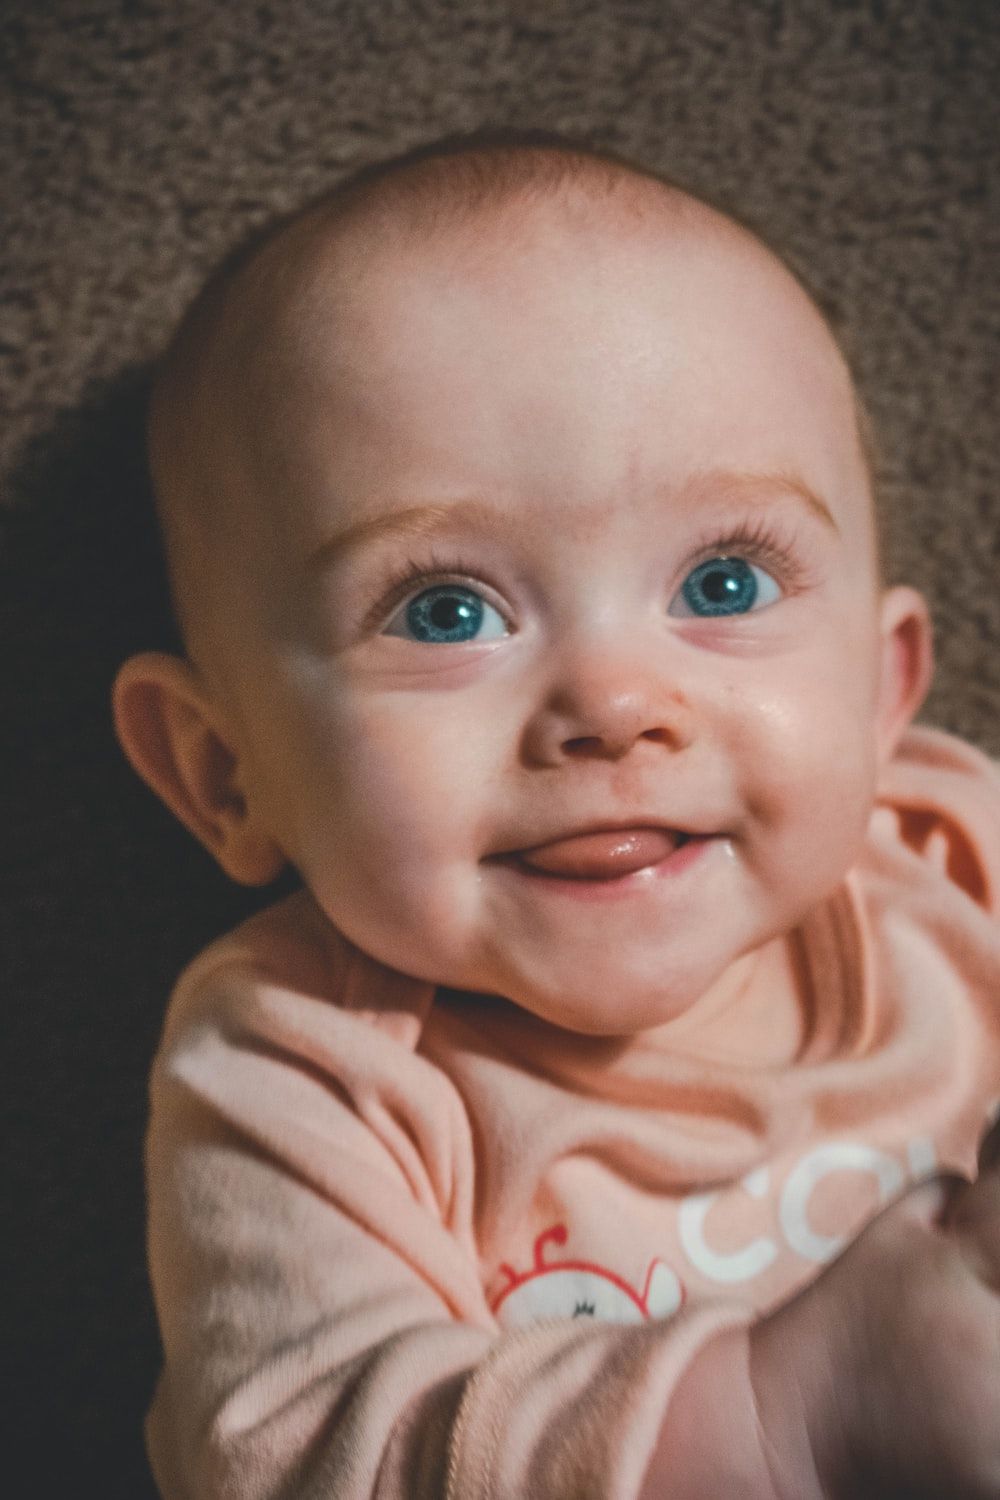 Baby Smile Picture. Download Free Image